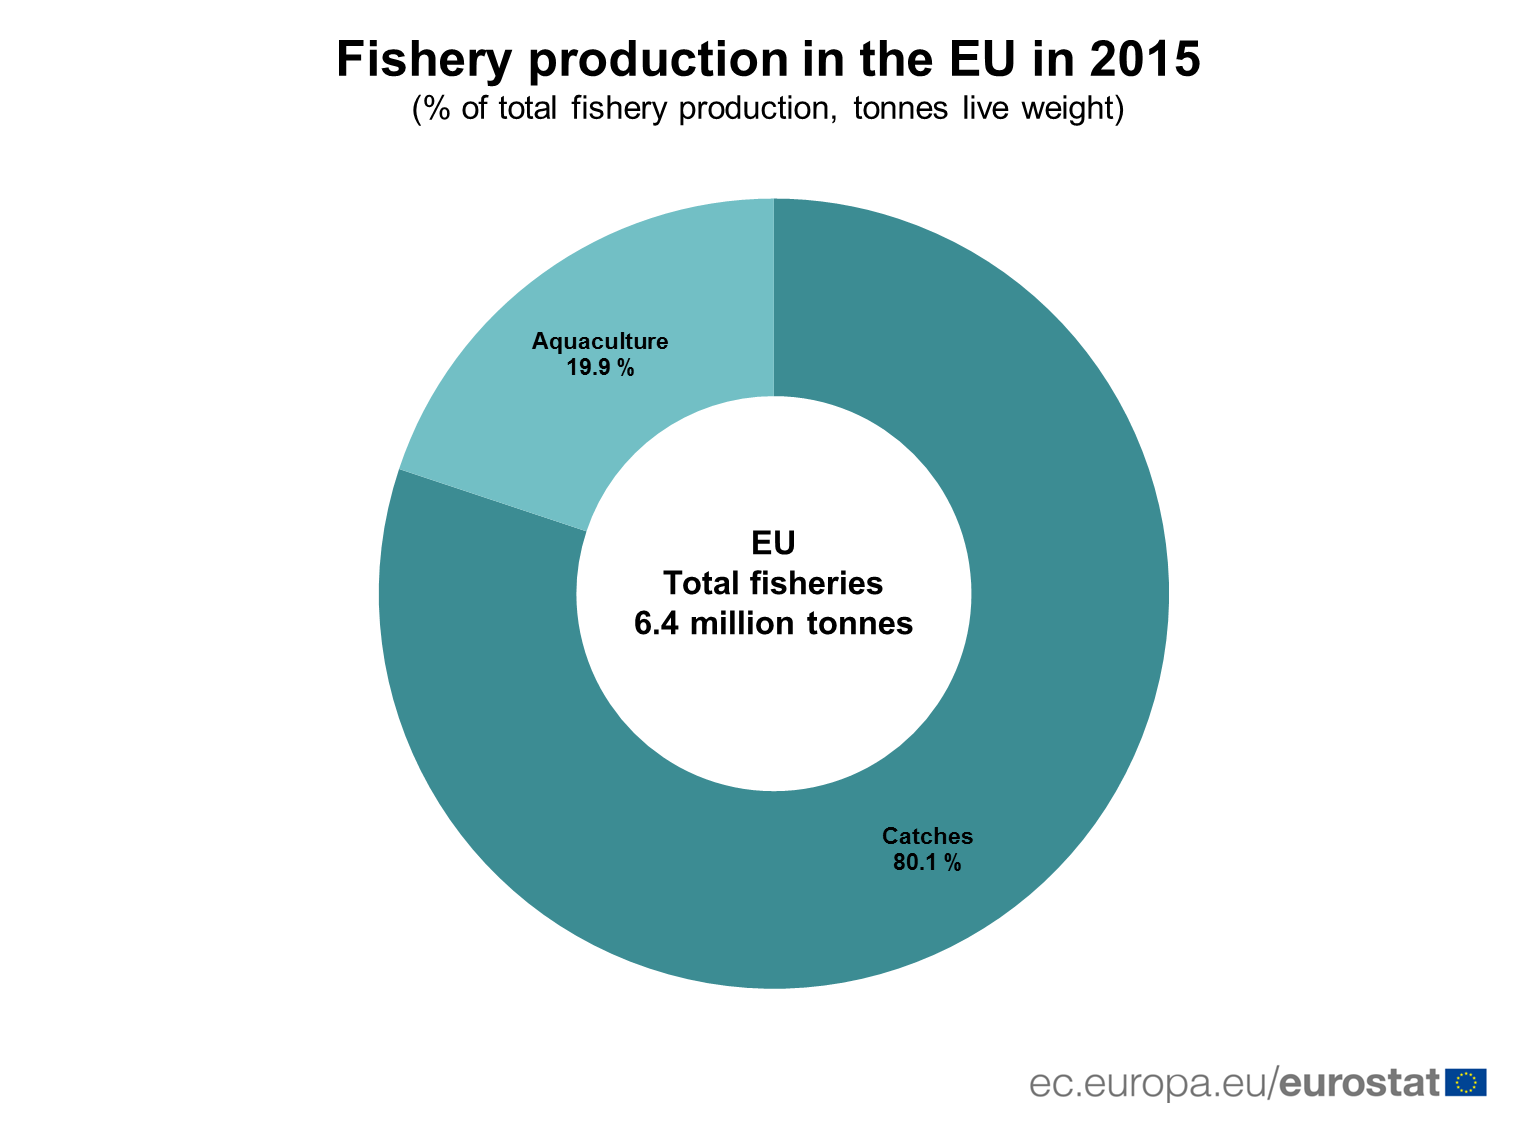 Fishery production in the EU in 2015